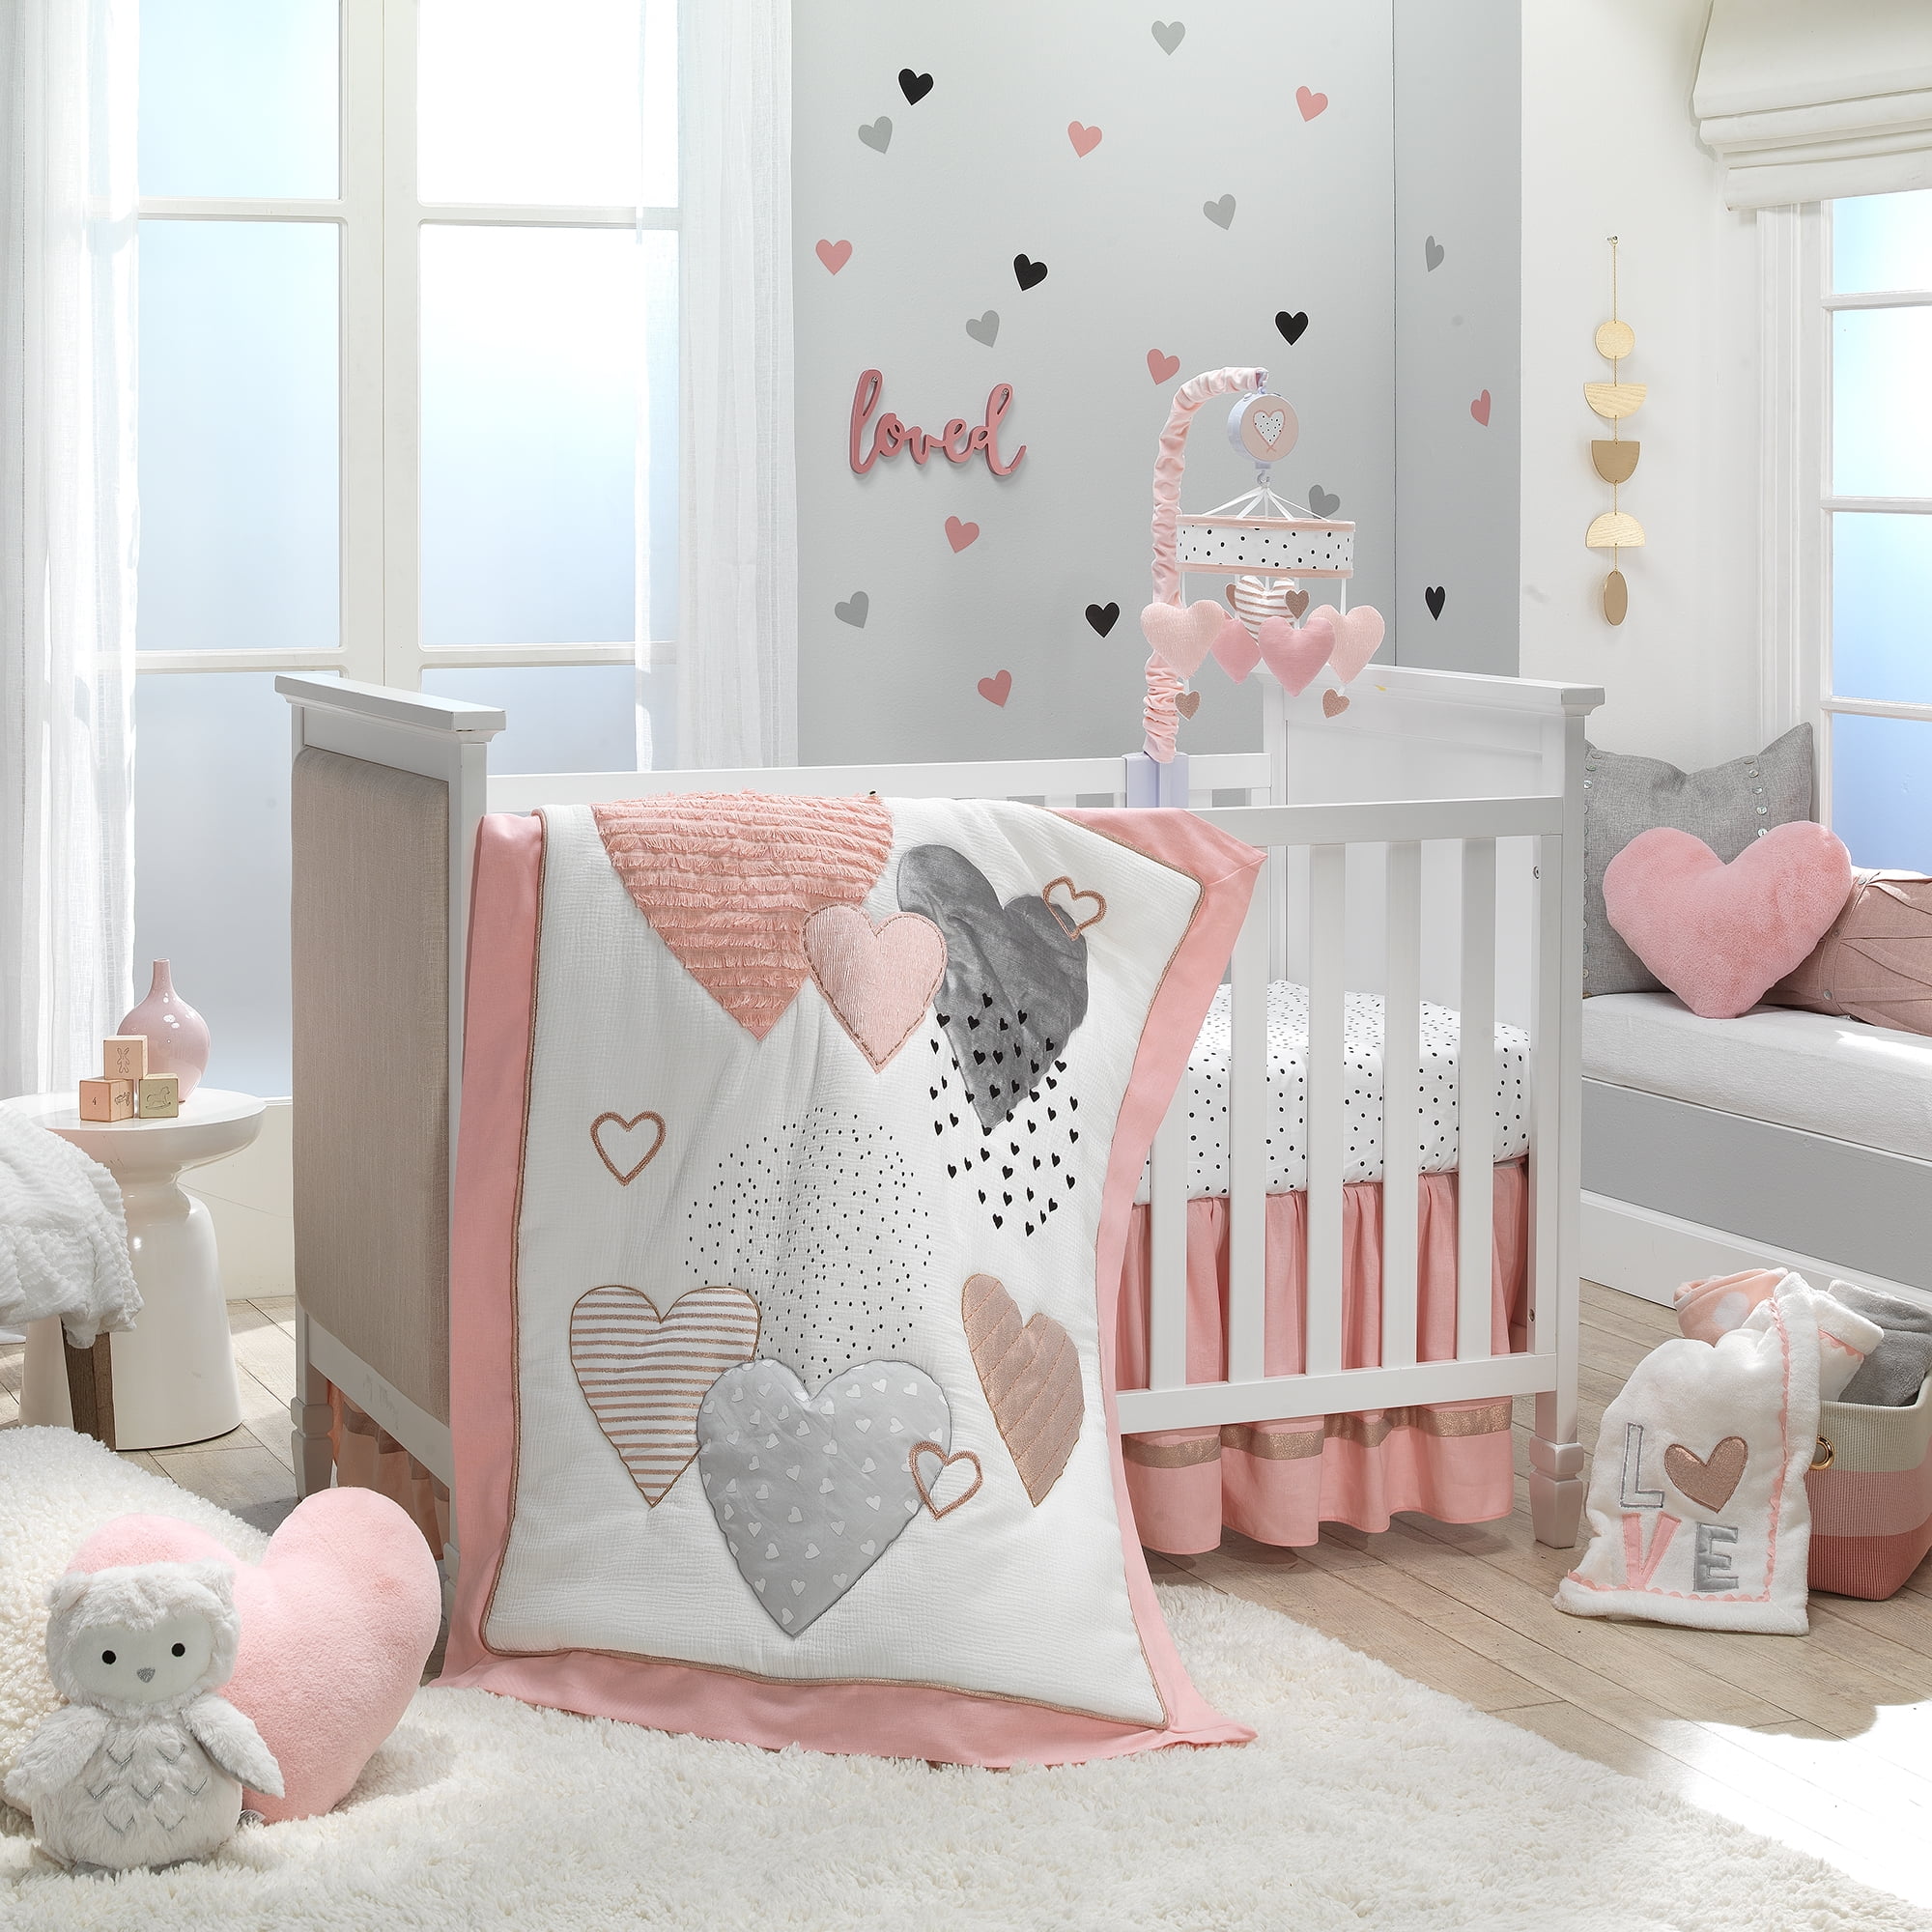 8 pcs BABY BEDDING SET /BUMPER/CANOPY /HOLDER to fit COT or COT BED CREAM 